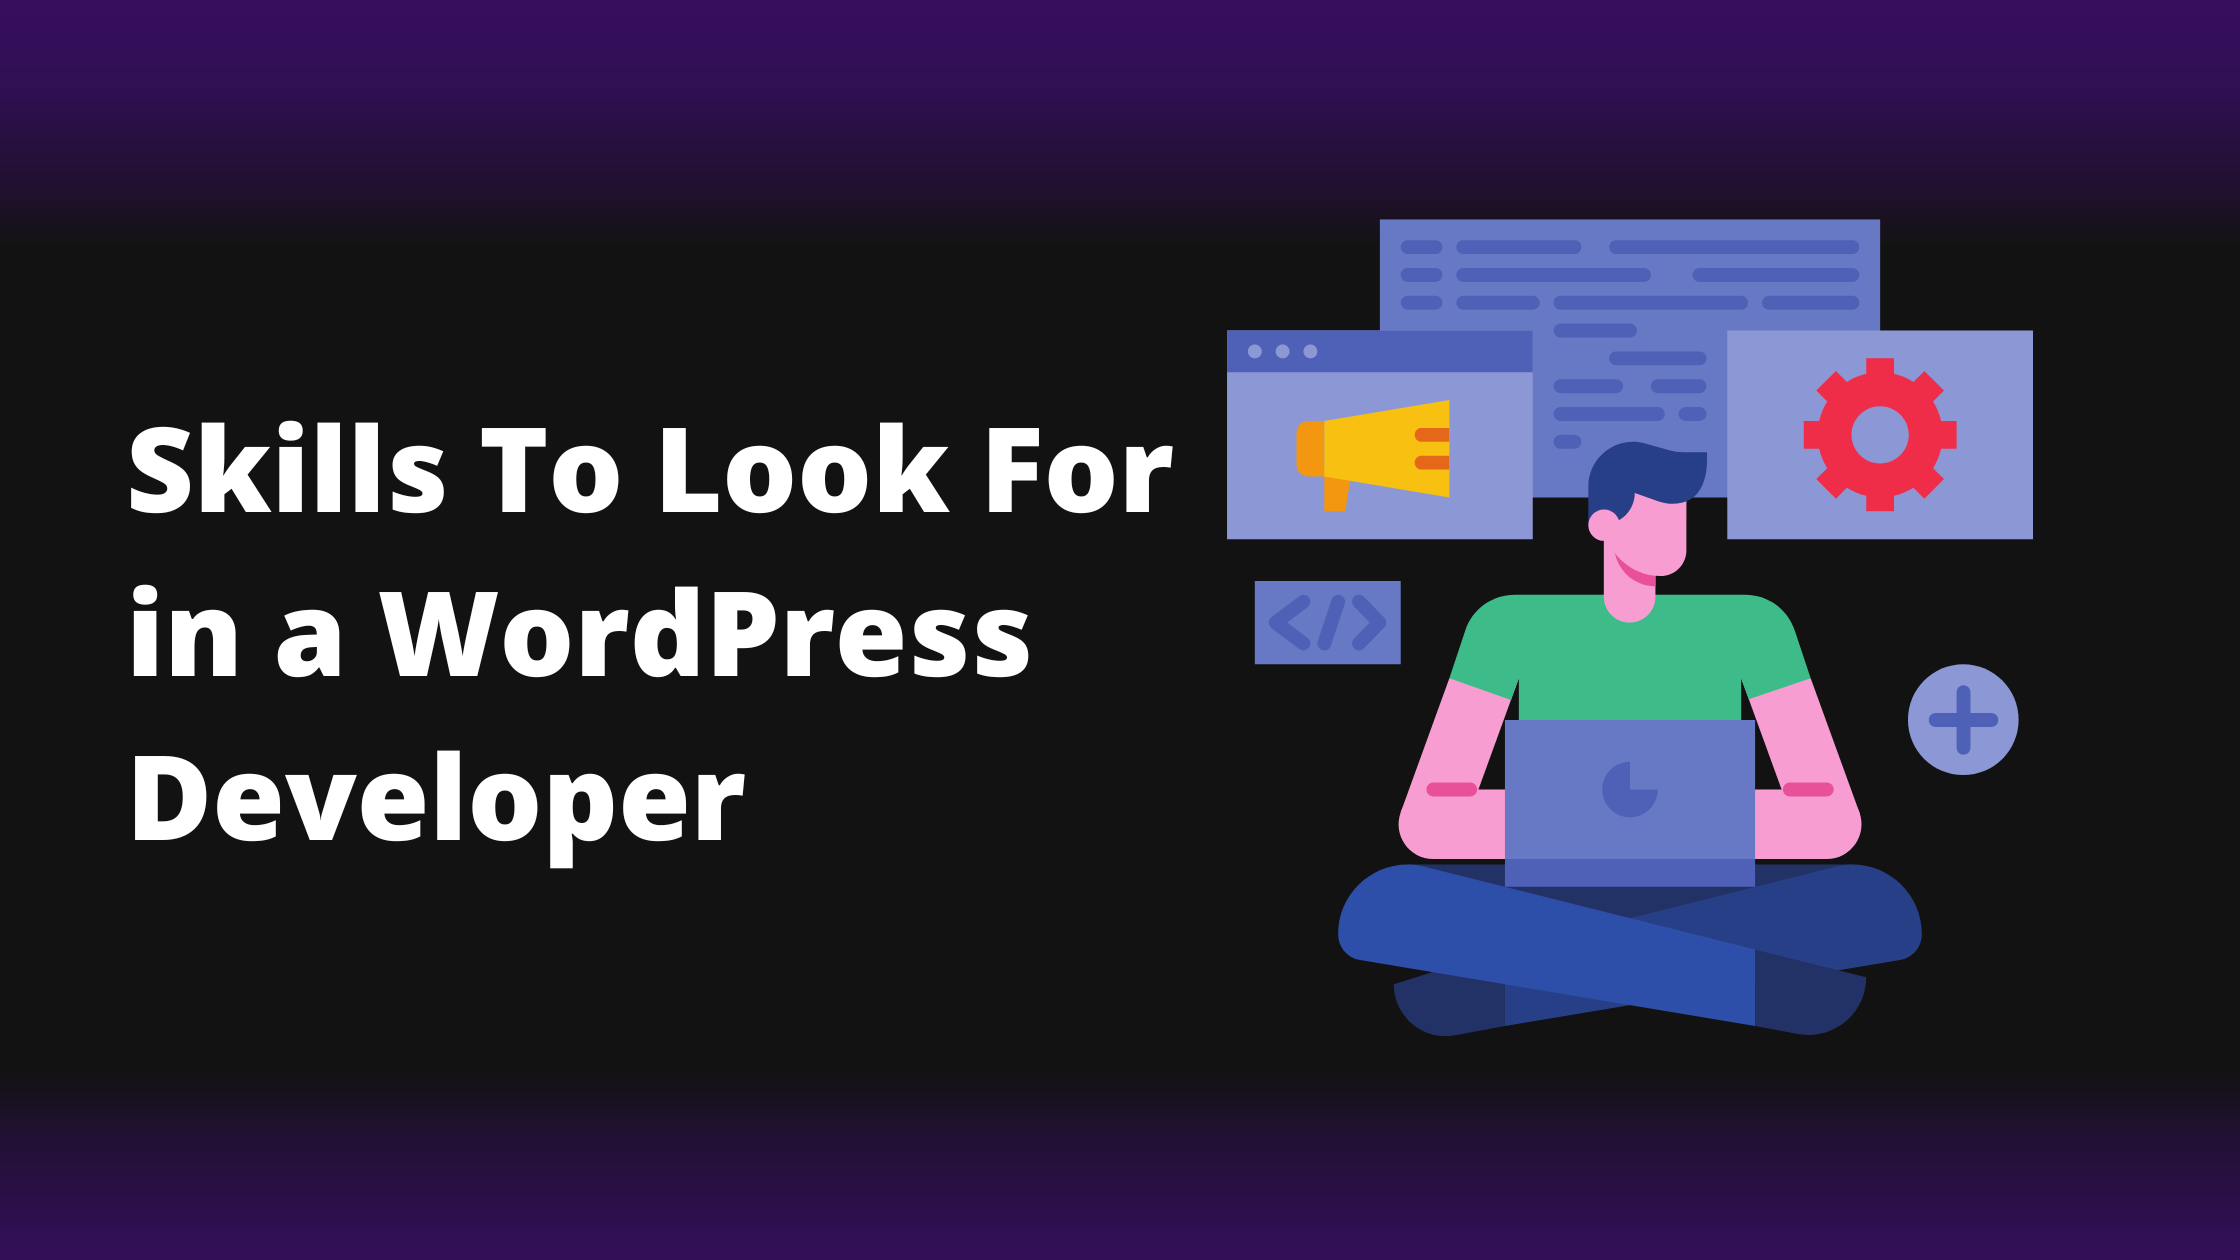 The Complete List of WordPress Skills to Look For in Developers